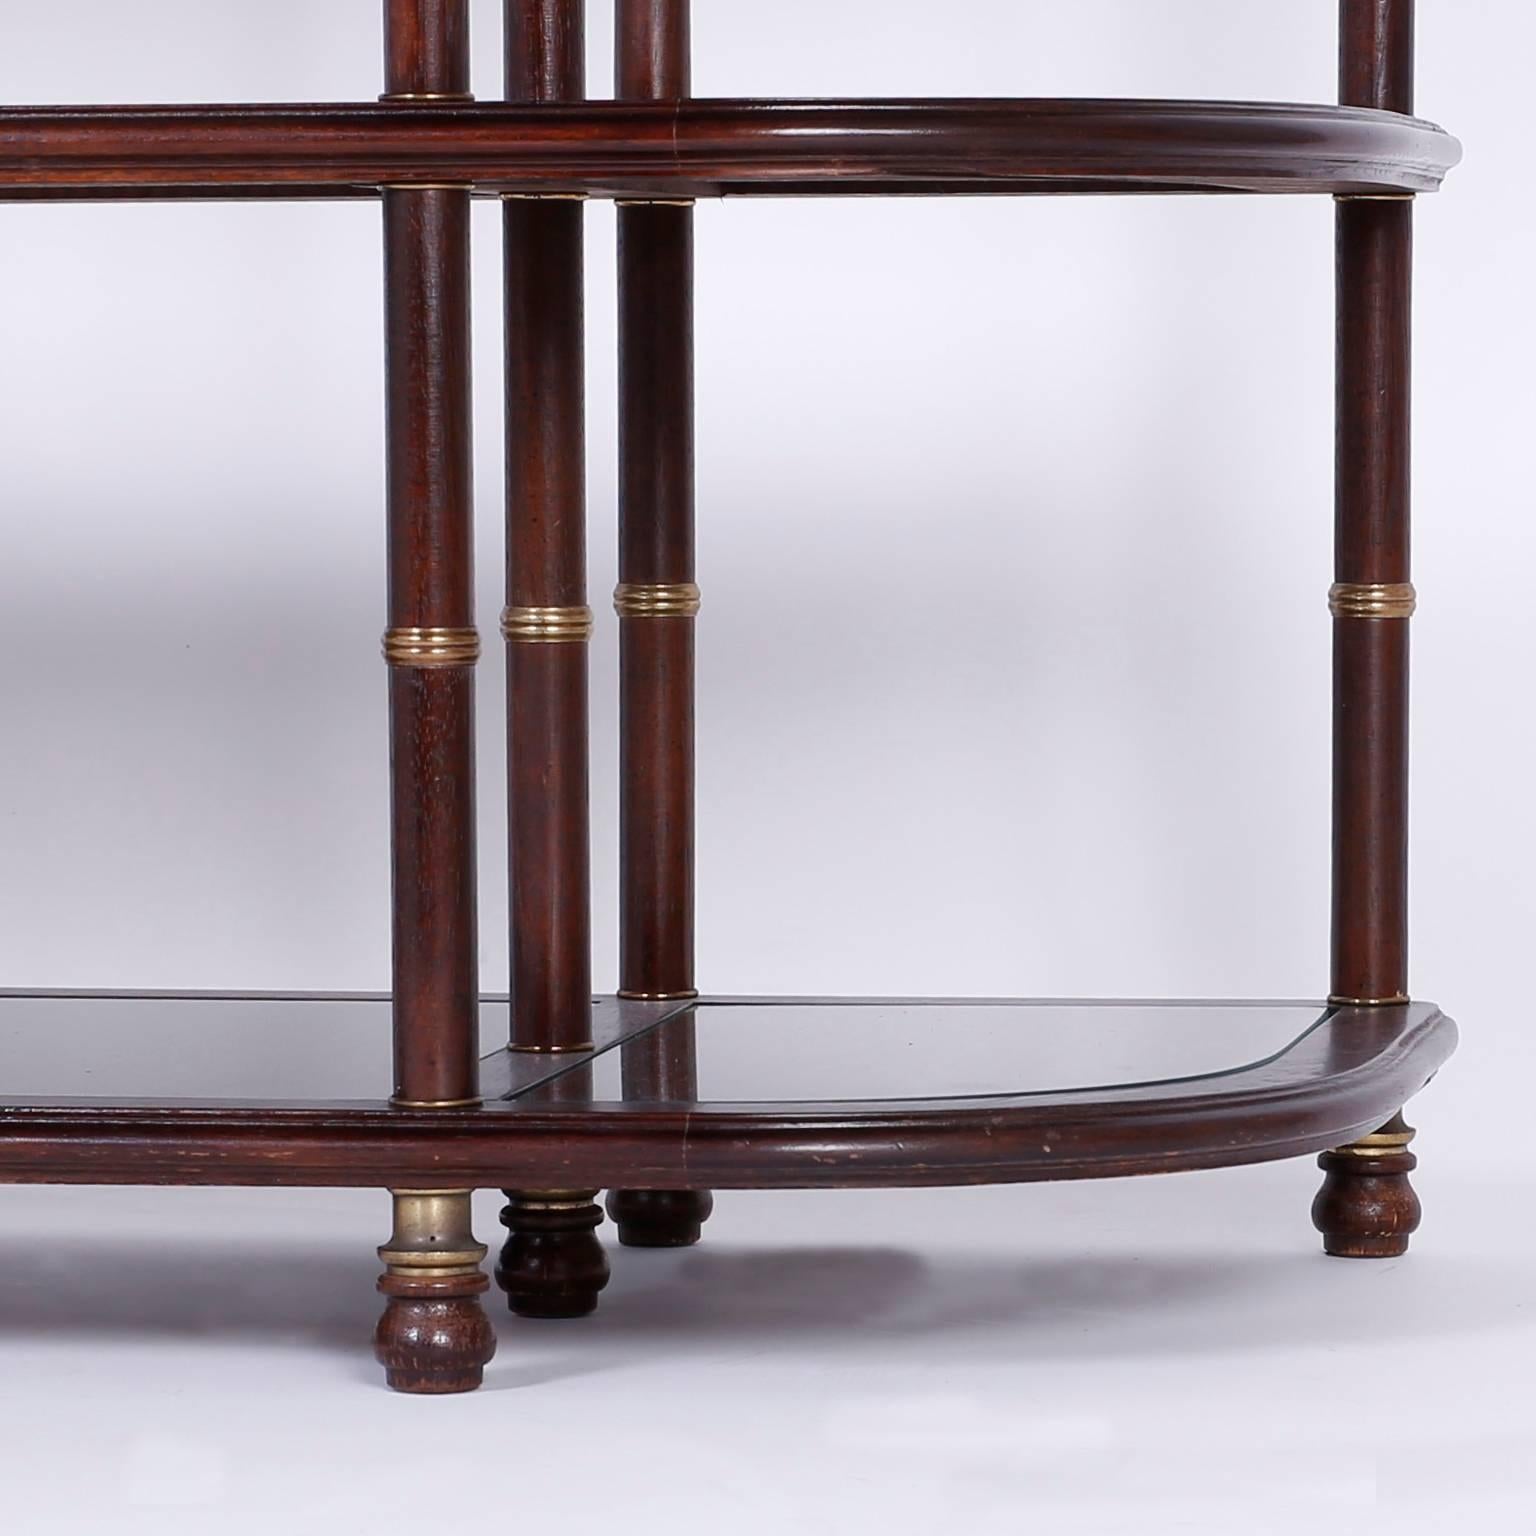 Regency Style Mahogany Étagère or Shelf with Faux Bamboo Accents 3